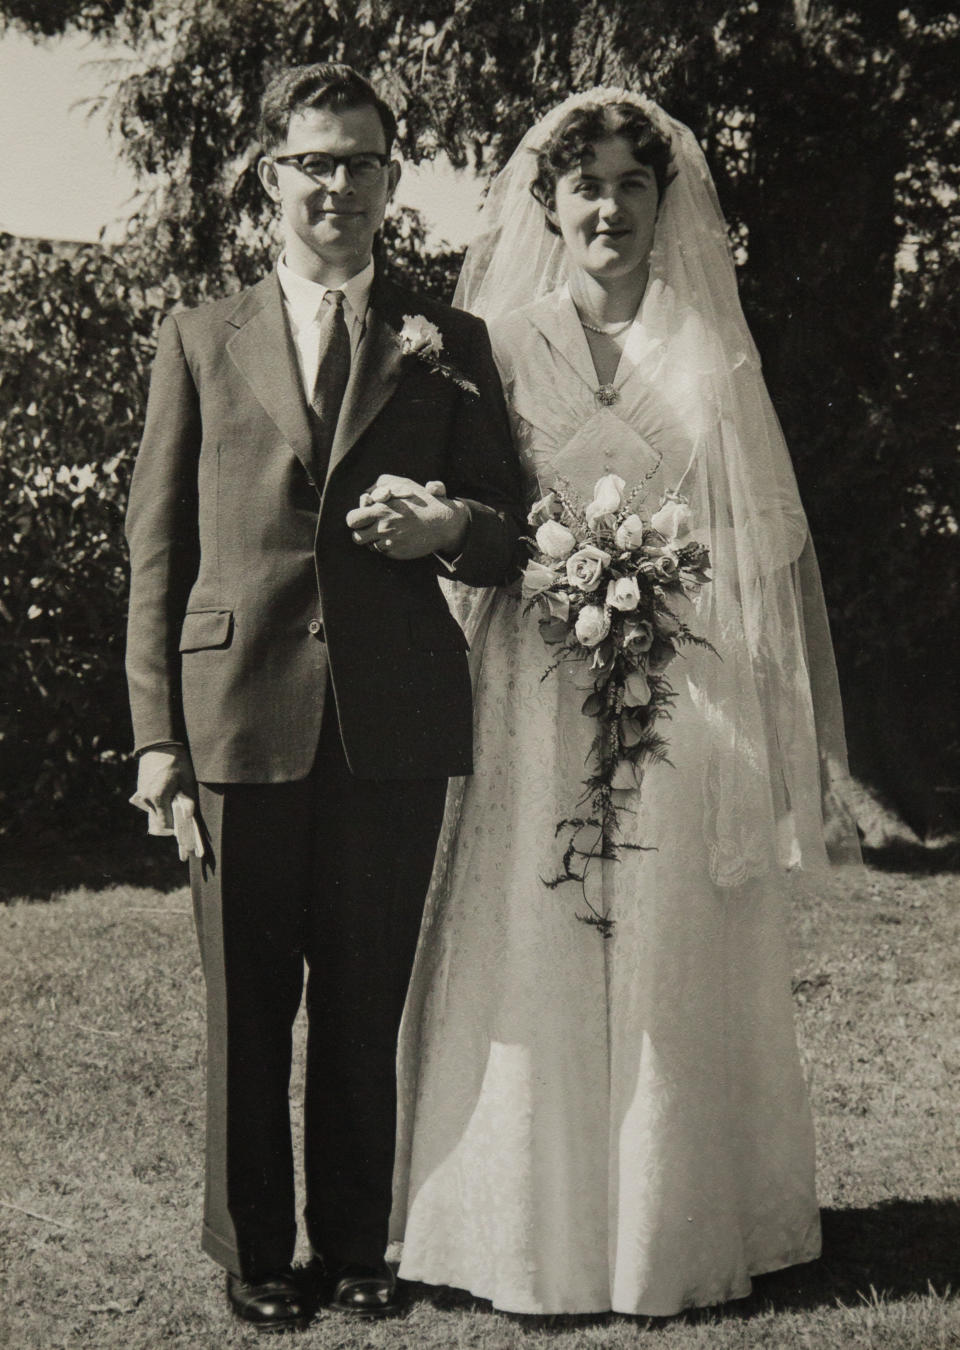 The couple on their wedding day in 1956 (Picture: SWNS)